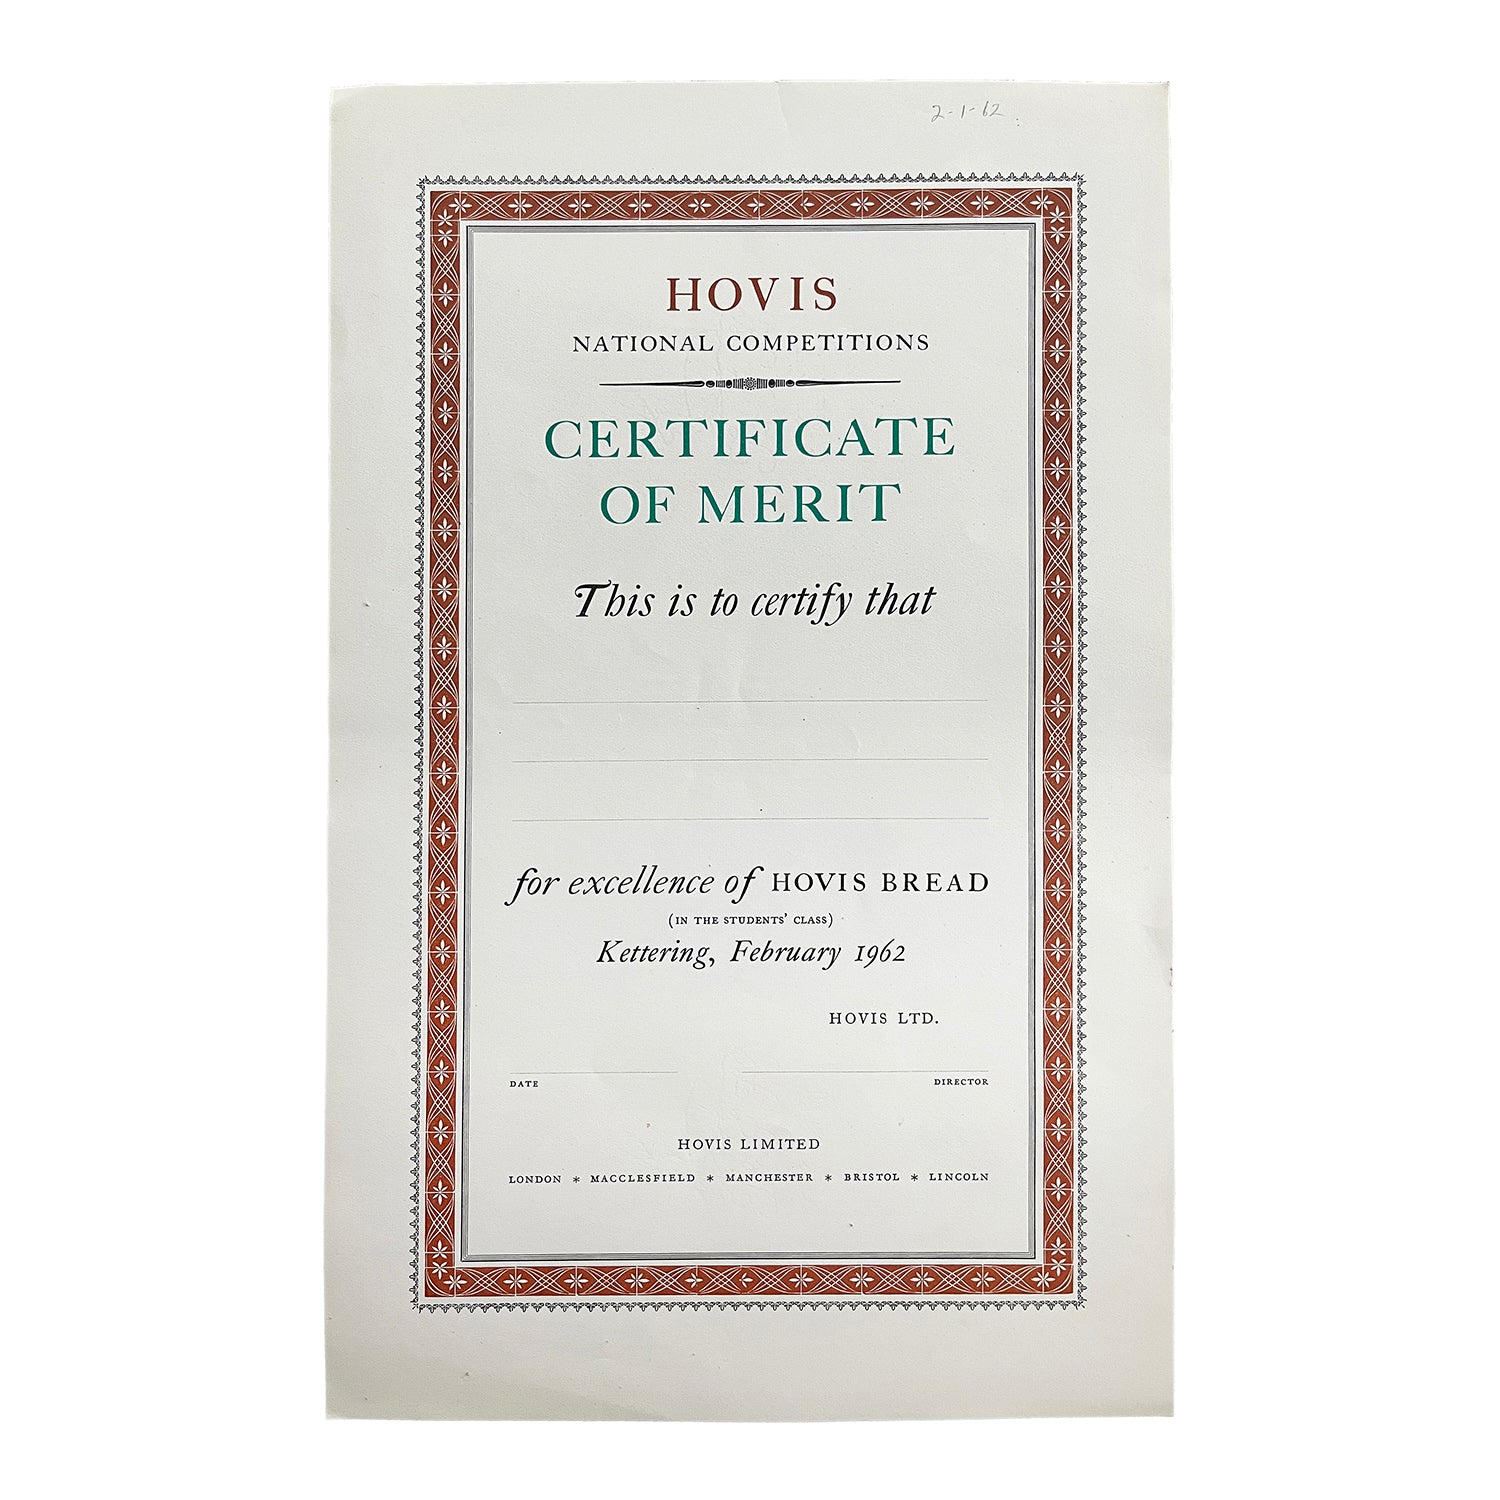 original unissued proof certificate from the Curwen Press, Hovis Certificate of Merit, Kettering, 1962